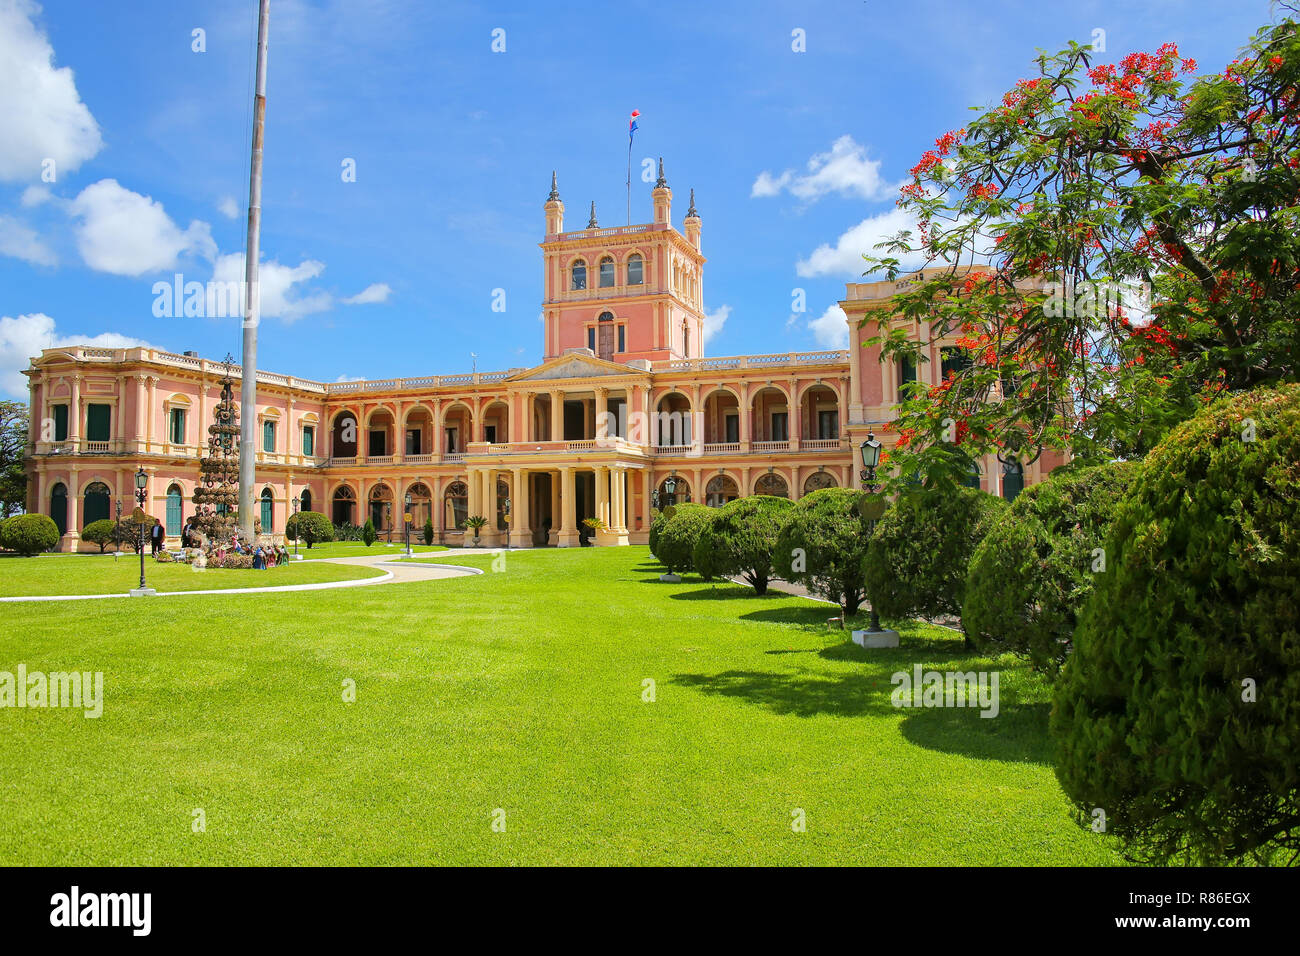 Presidential Palace in Asuncion, Paraguay. It serves as a workplace for the President and the government of Paraguay. Stock Photo